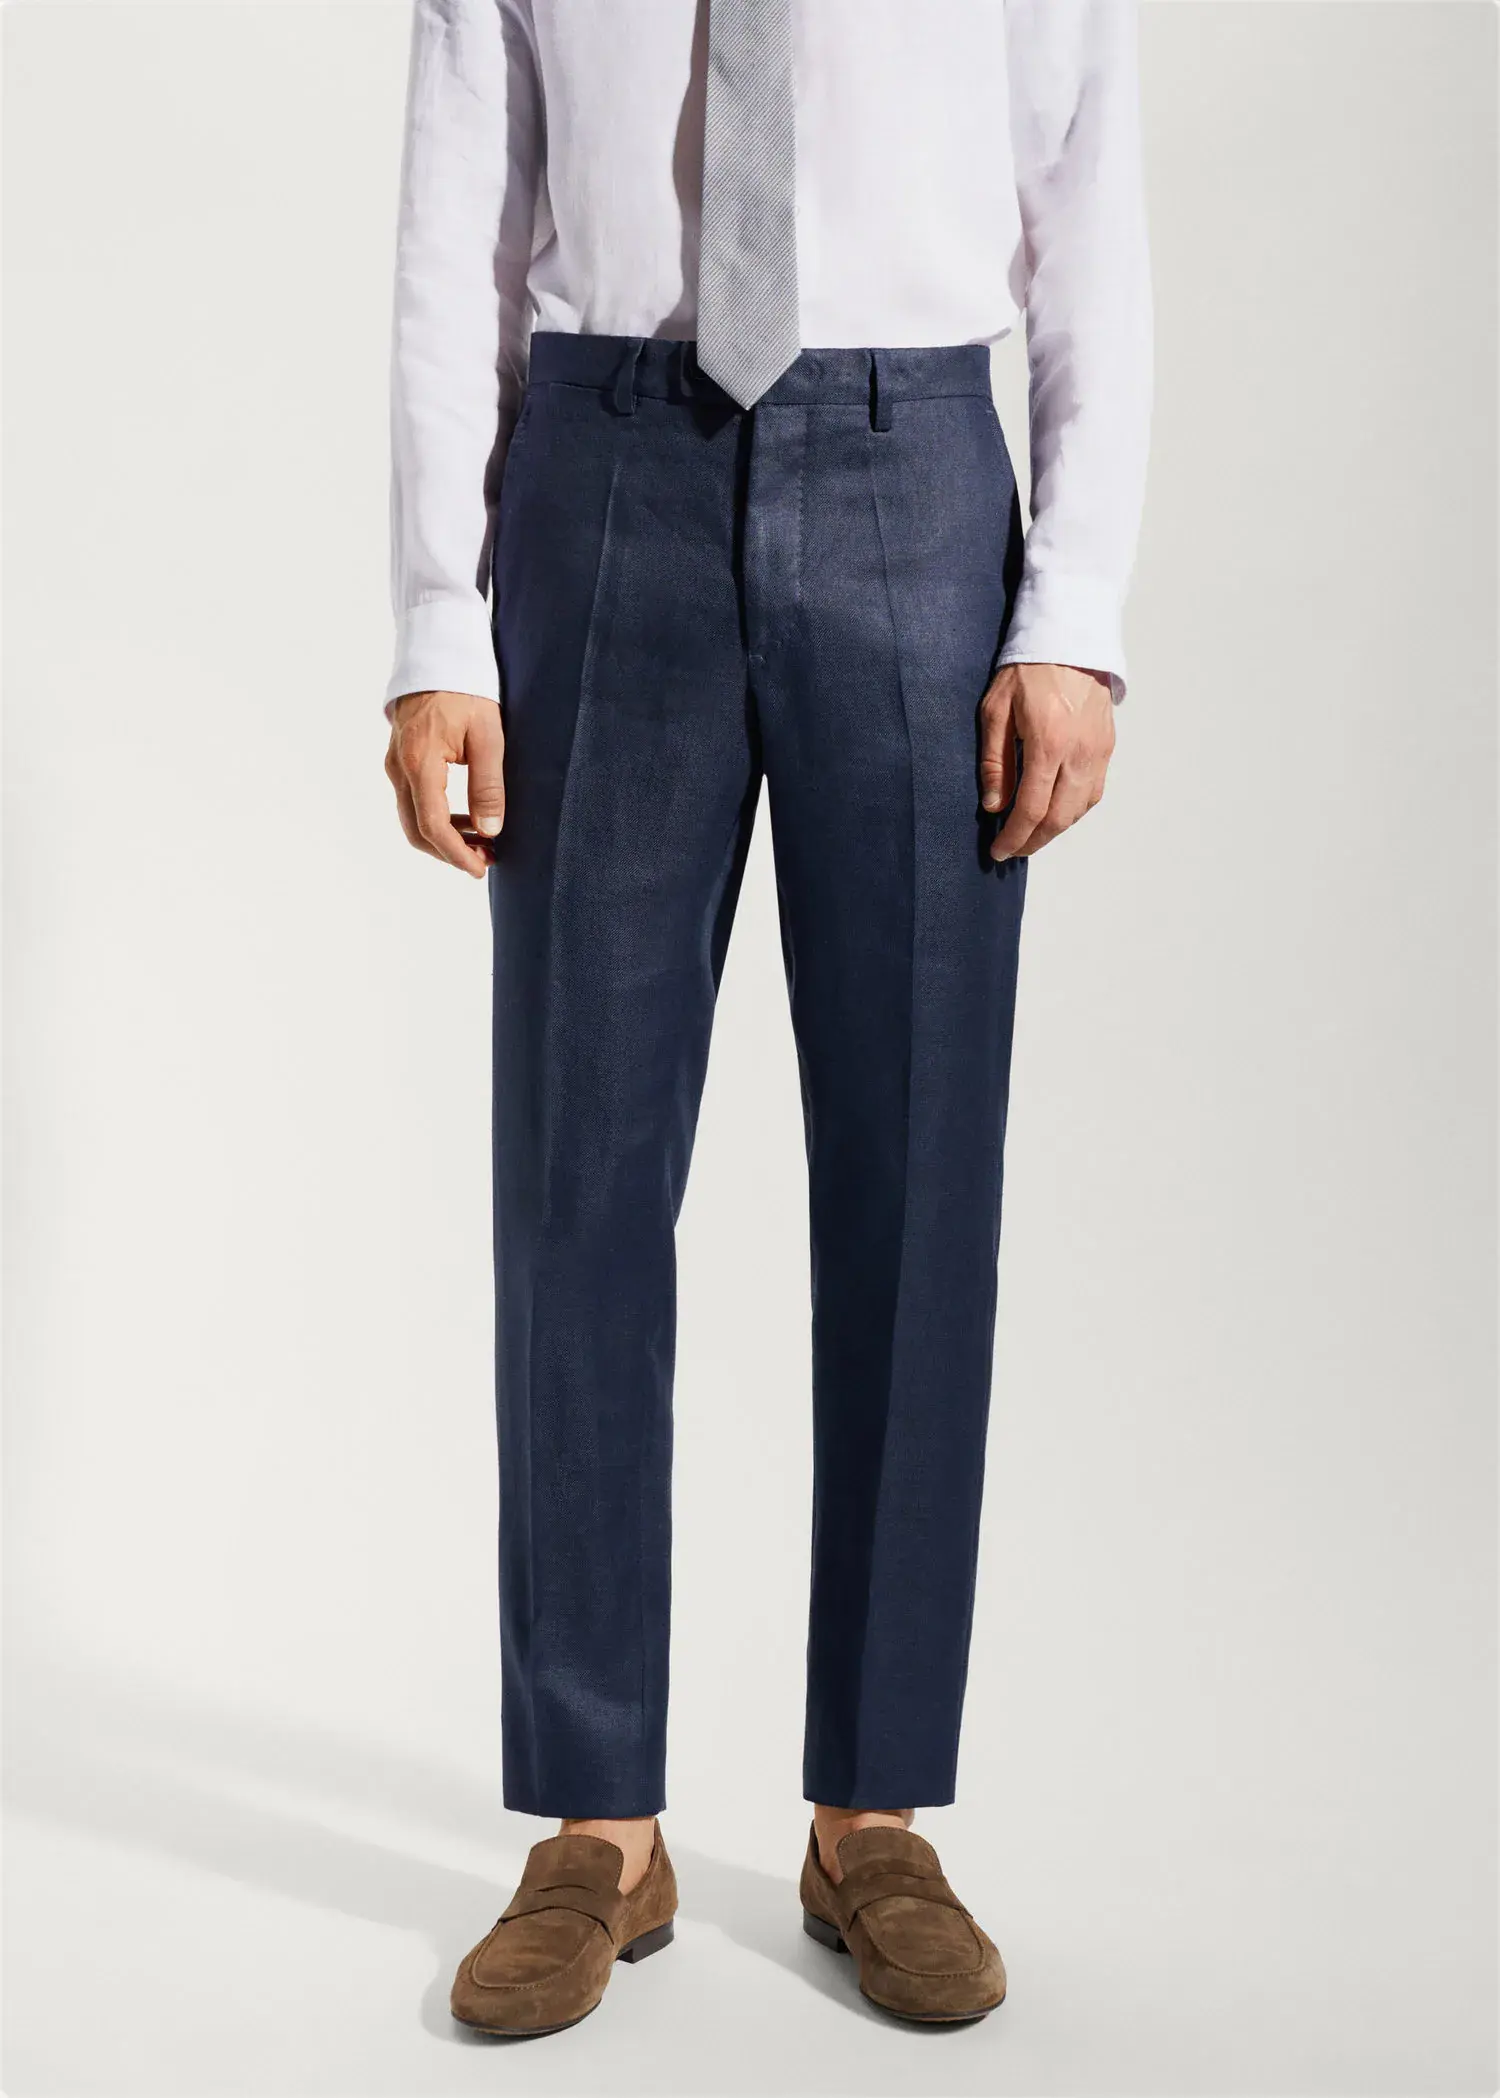 Mango 100% linen suit trousers. a man wearing a suit and tie standing in front of a wall. 